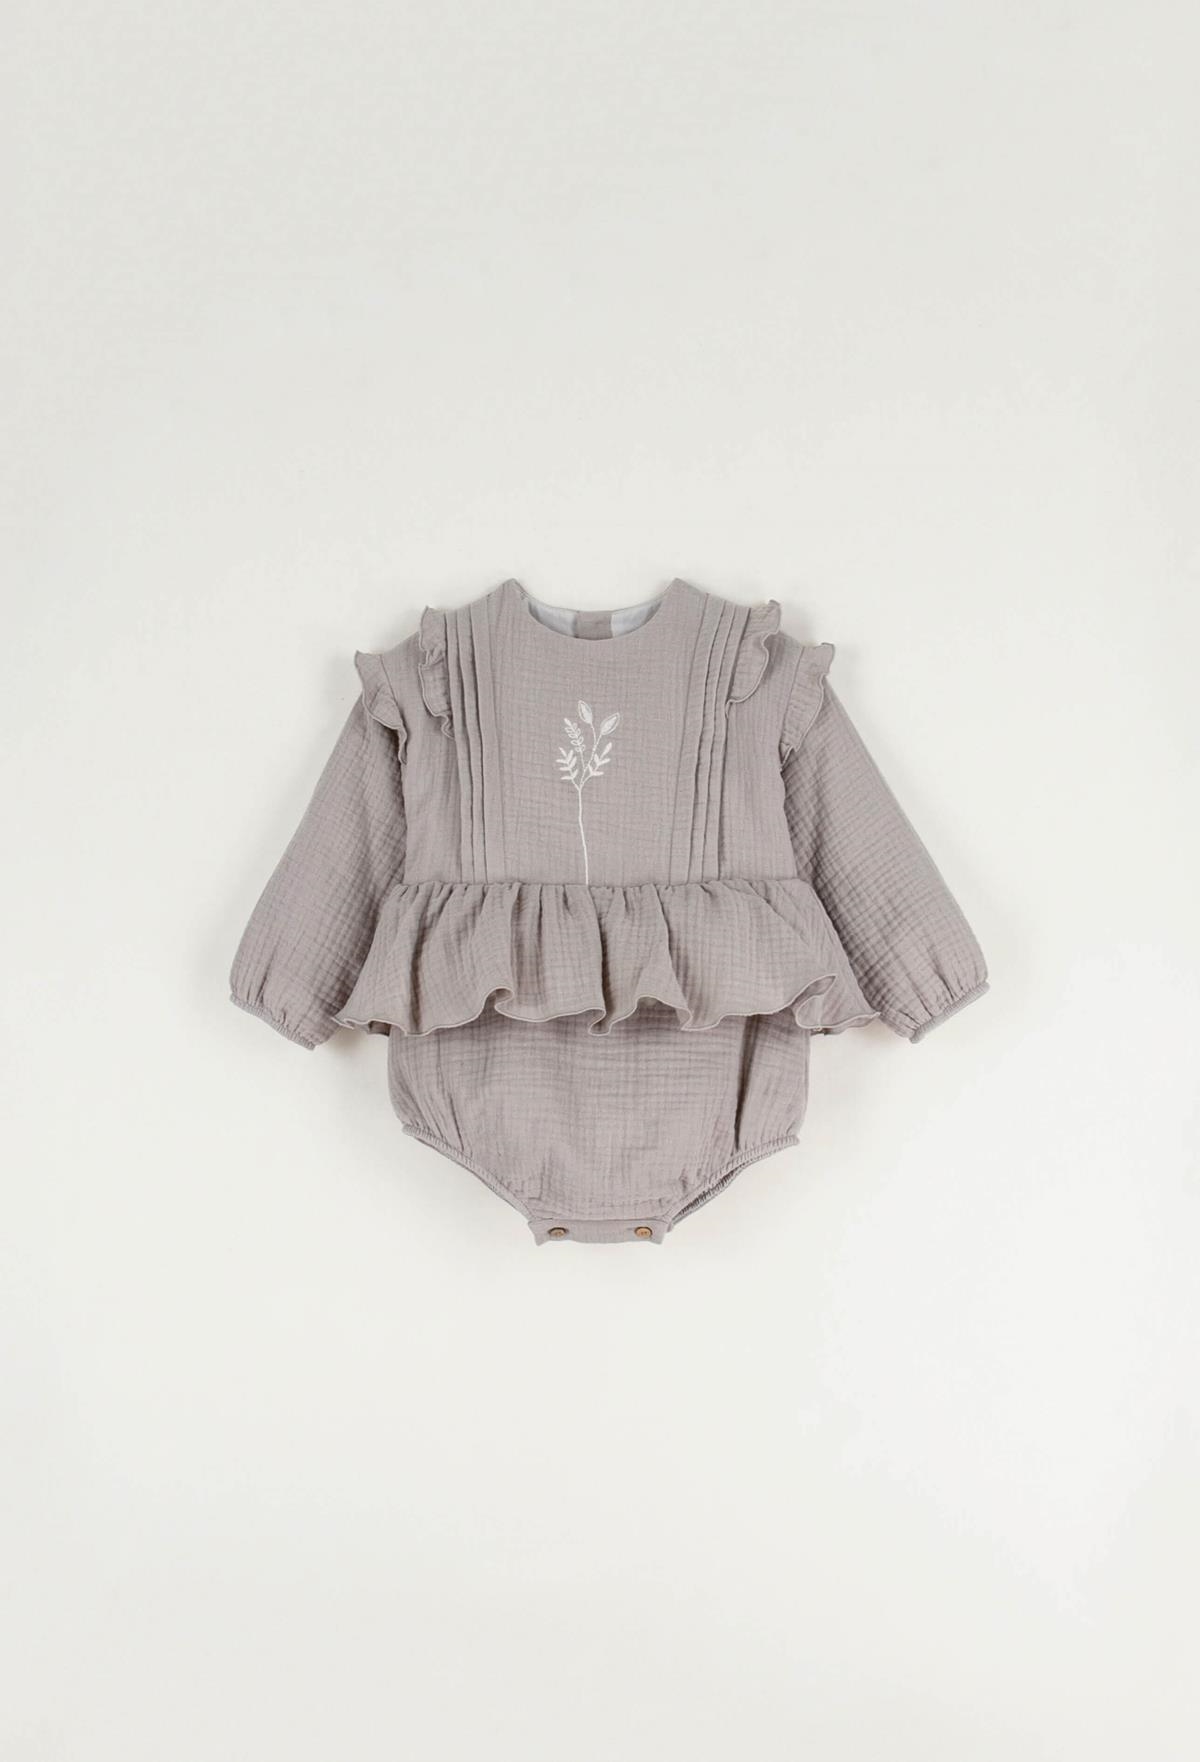 Mod.3.1 Taupe organic fabric embroidered romper suit with pintucks | AW22.23 Mod.3.1 Taupe organic fabric embroidered romper suit with pintucks